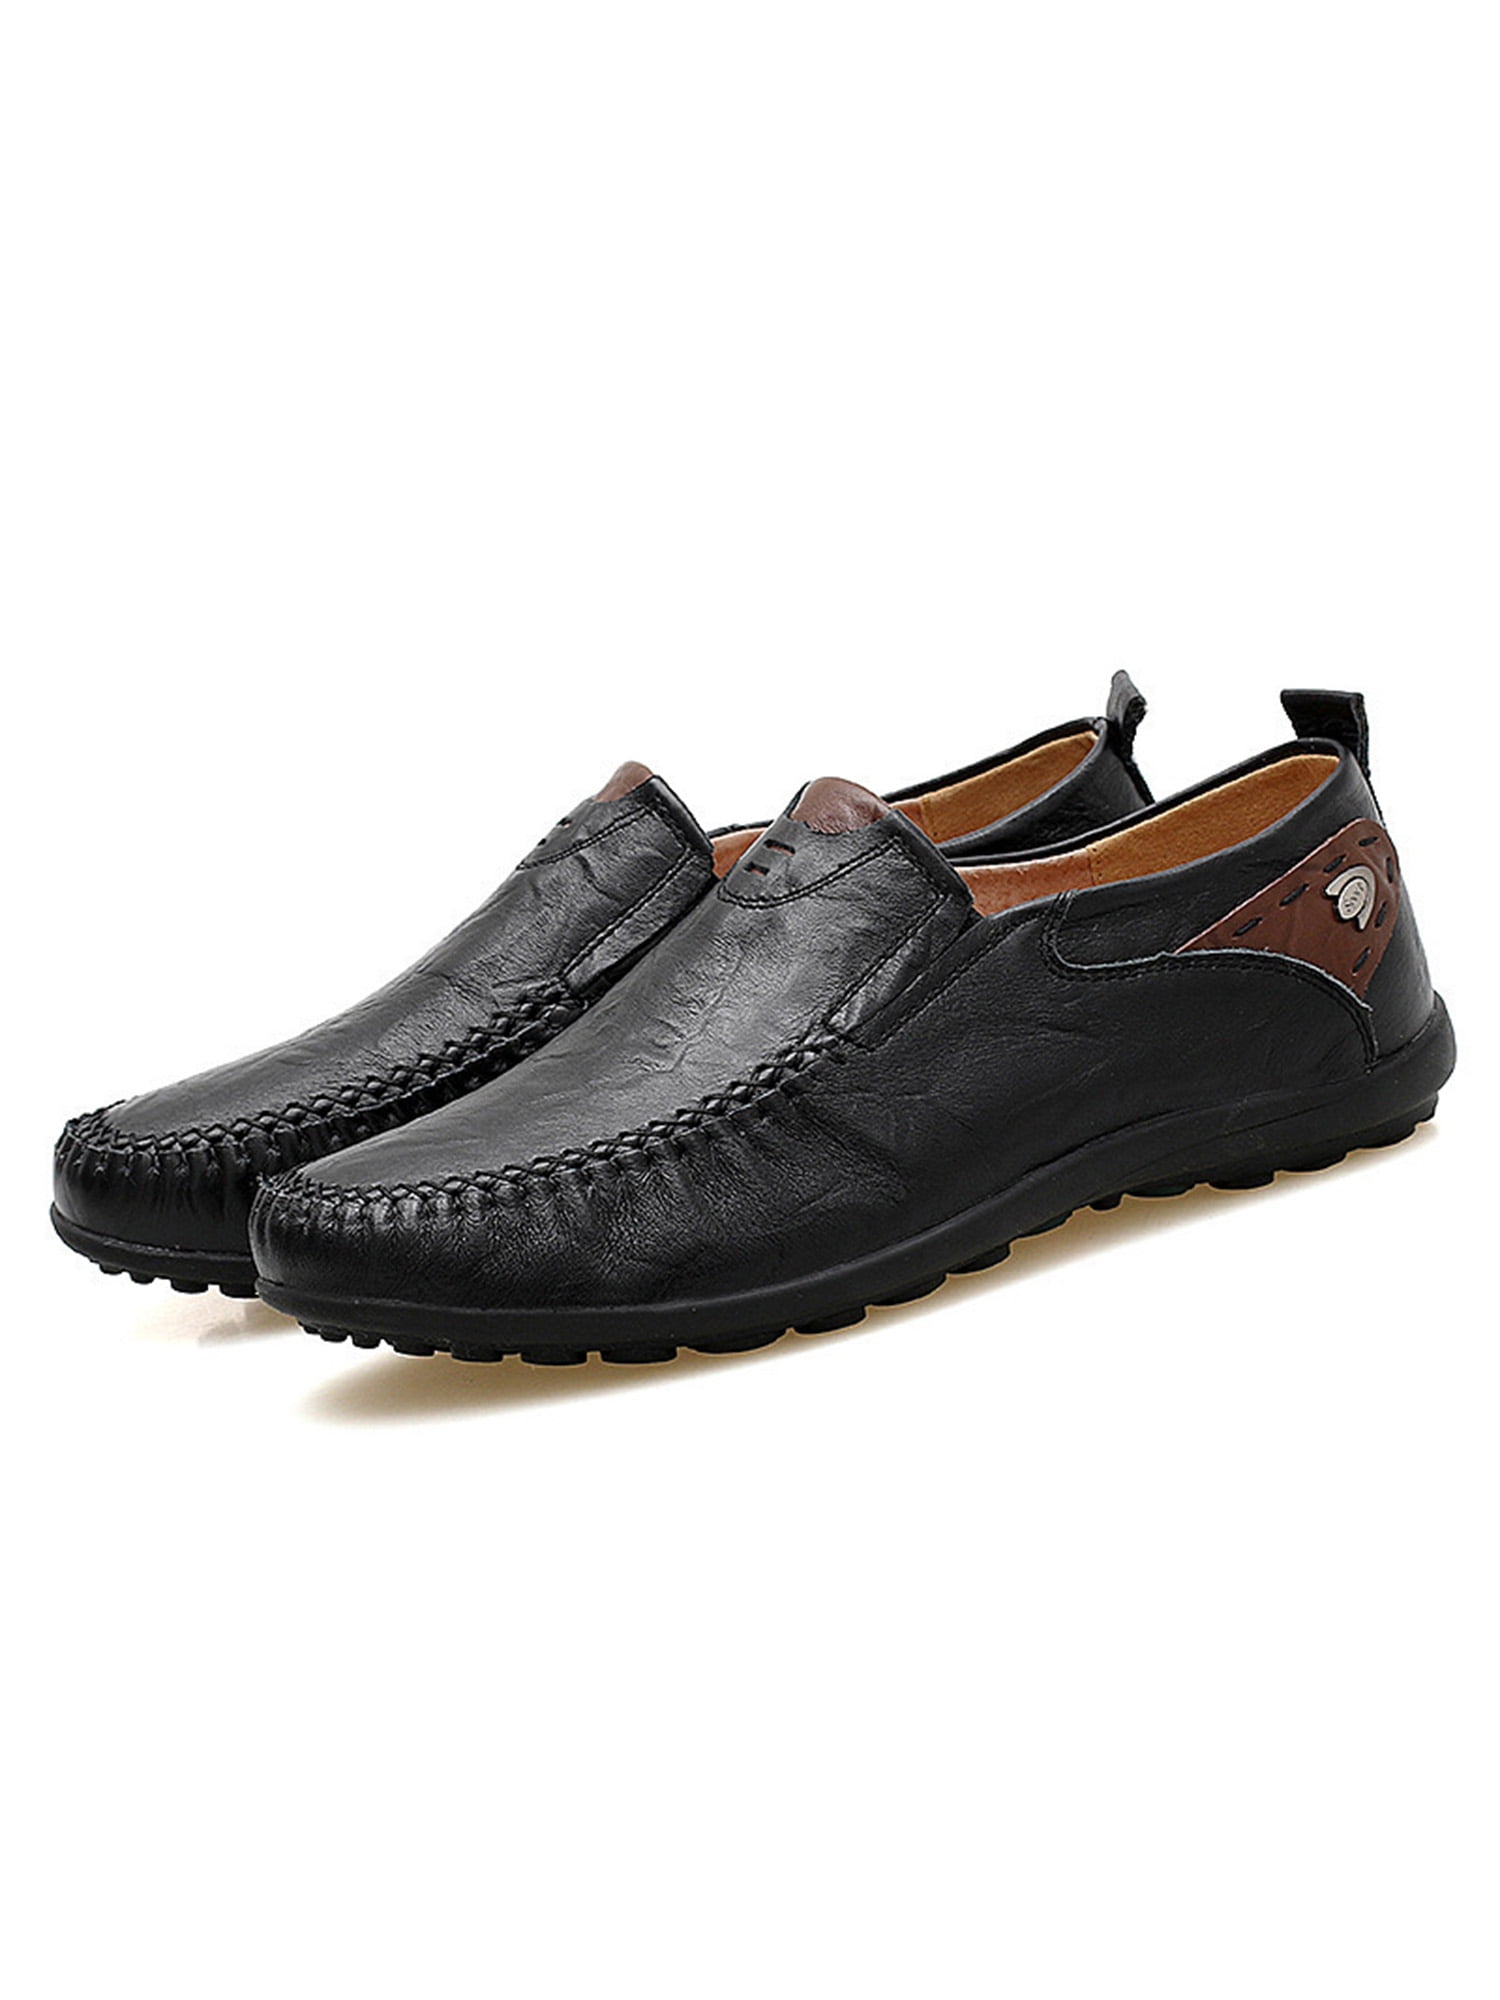 Men's PU Leather Driving Shoes Casual Slip On Loafers Breathable Moccasins H59 